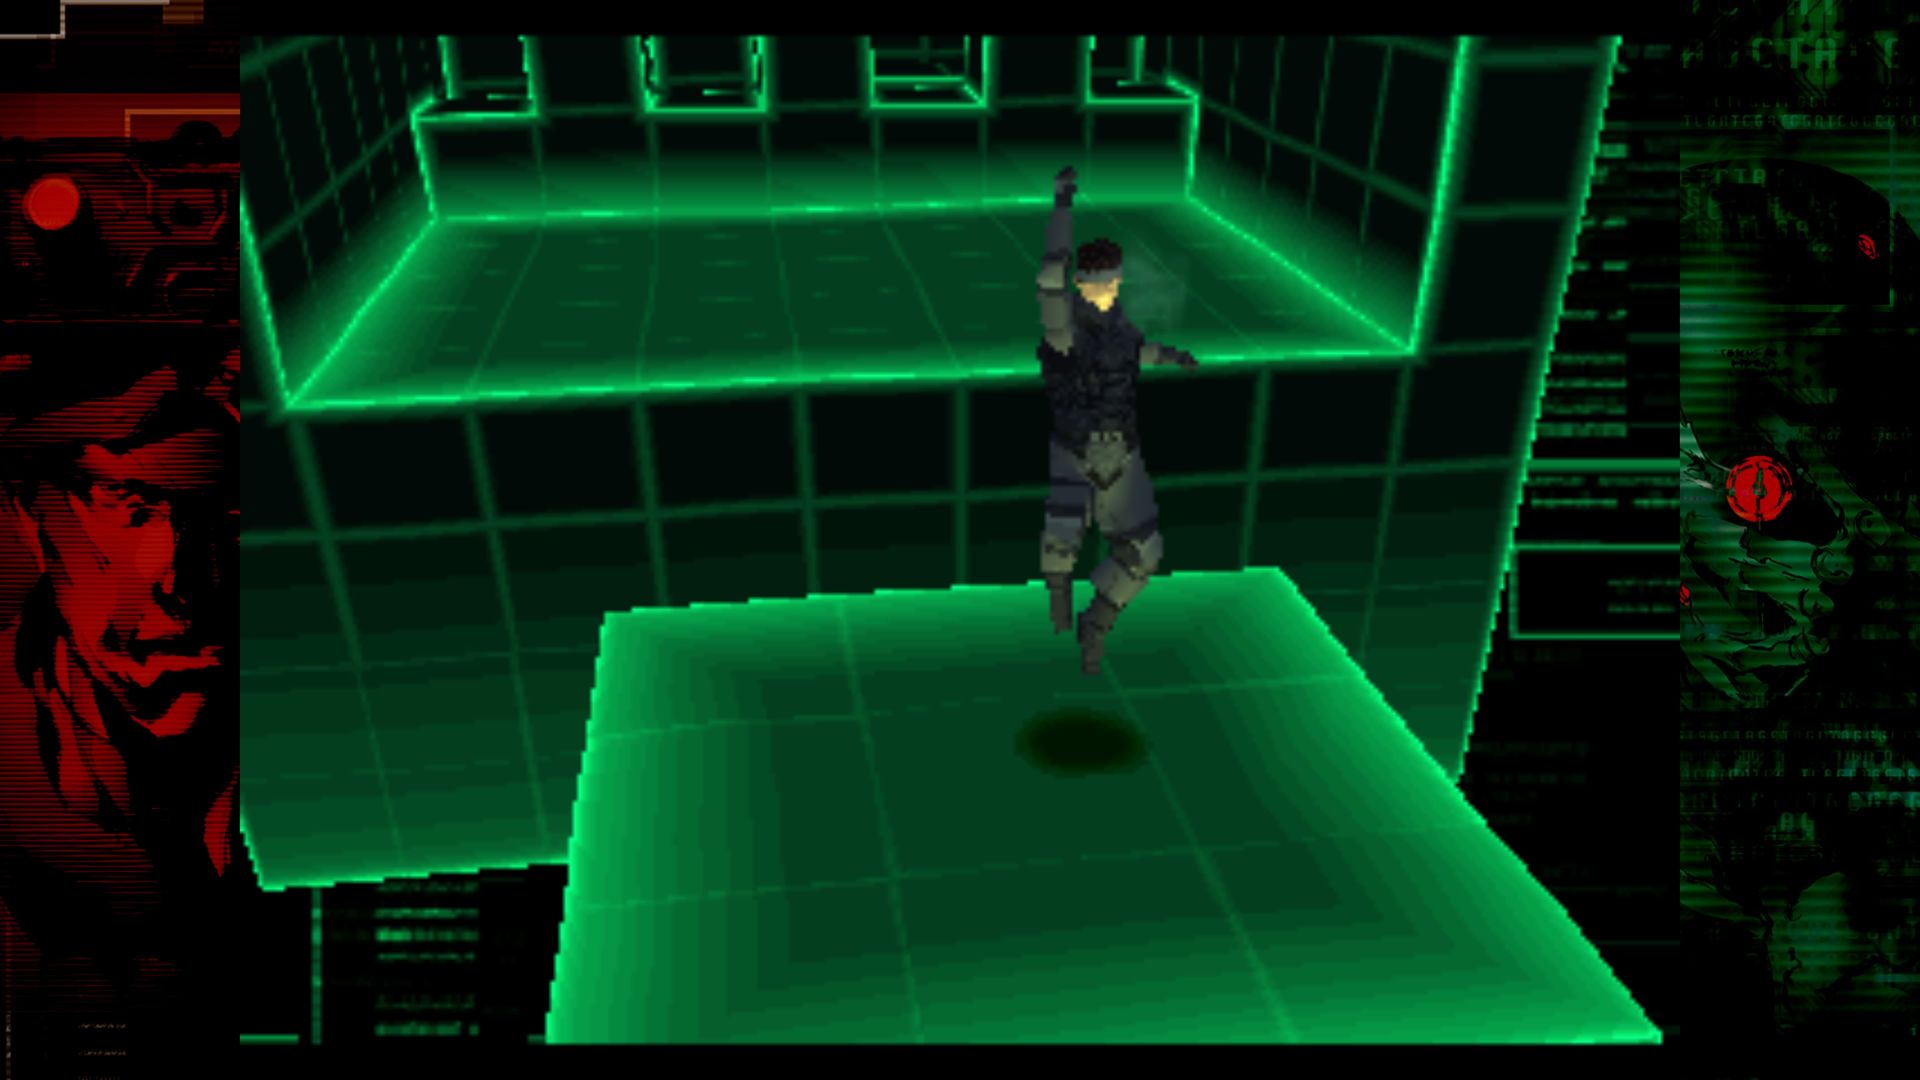 Screenshot shows Solid Snake jumping into the air with his fist raised in celebration after winning a top score in a VR mission. He is standing on a green platform in a virtual space.